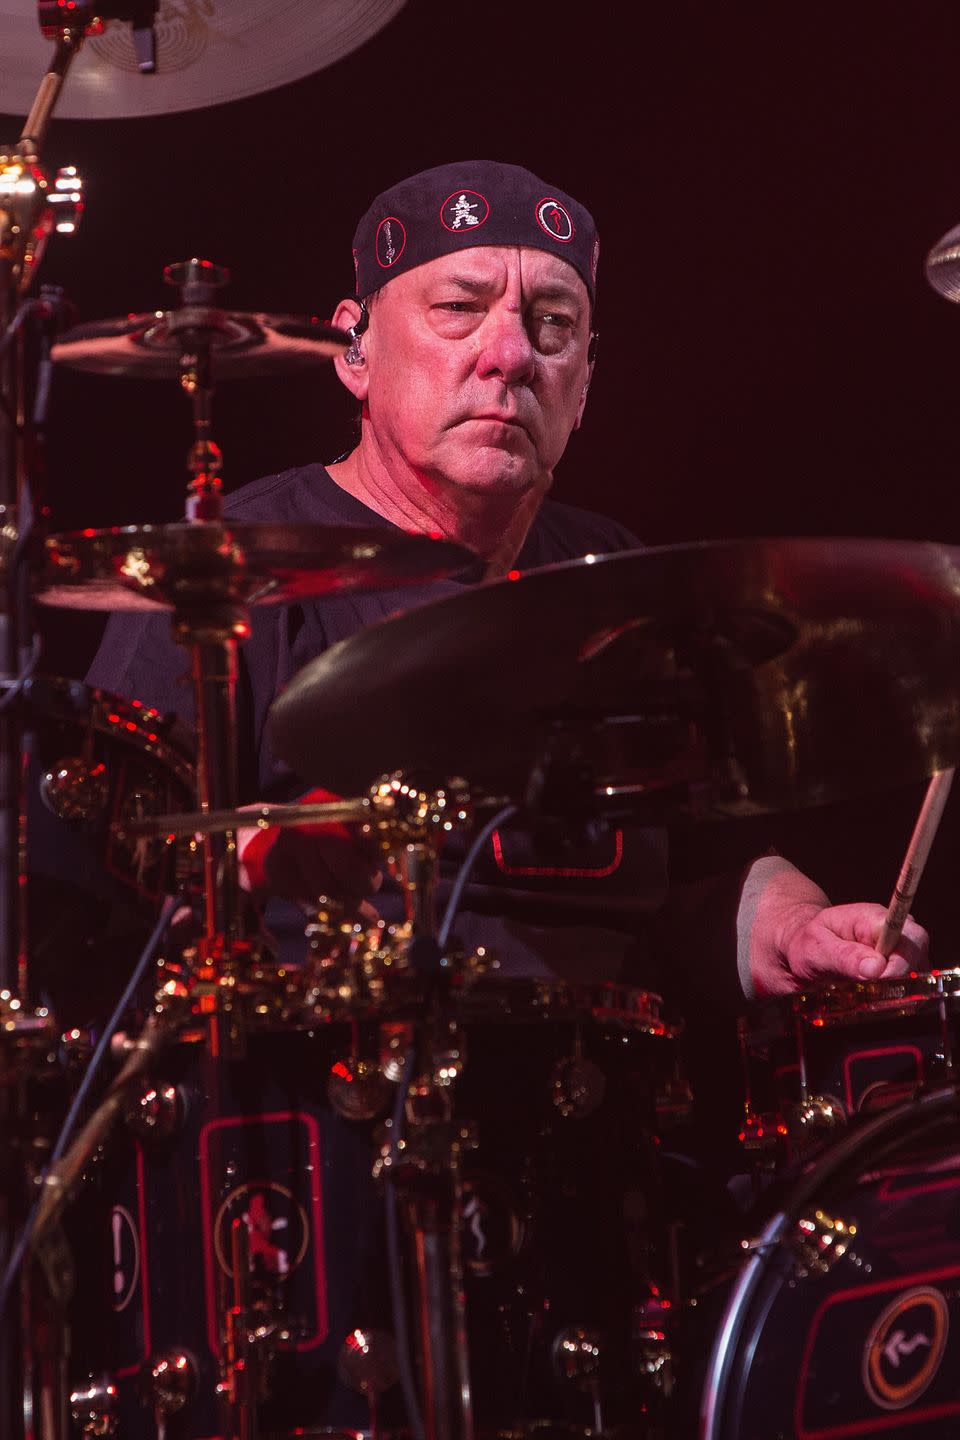 <p>"RIP Neil Peart drummer for Canadian rock band #Rush Condolences to his family and fellow band members Geddy and Alex #Rush #neilpeart." - Bryan Adams</p>